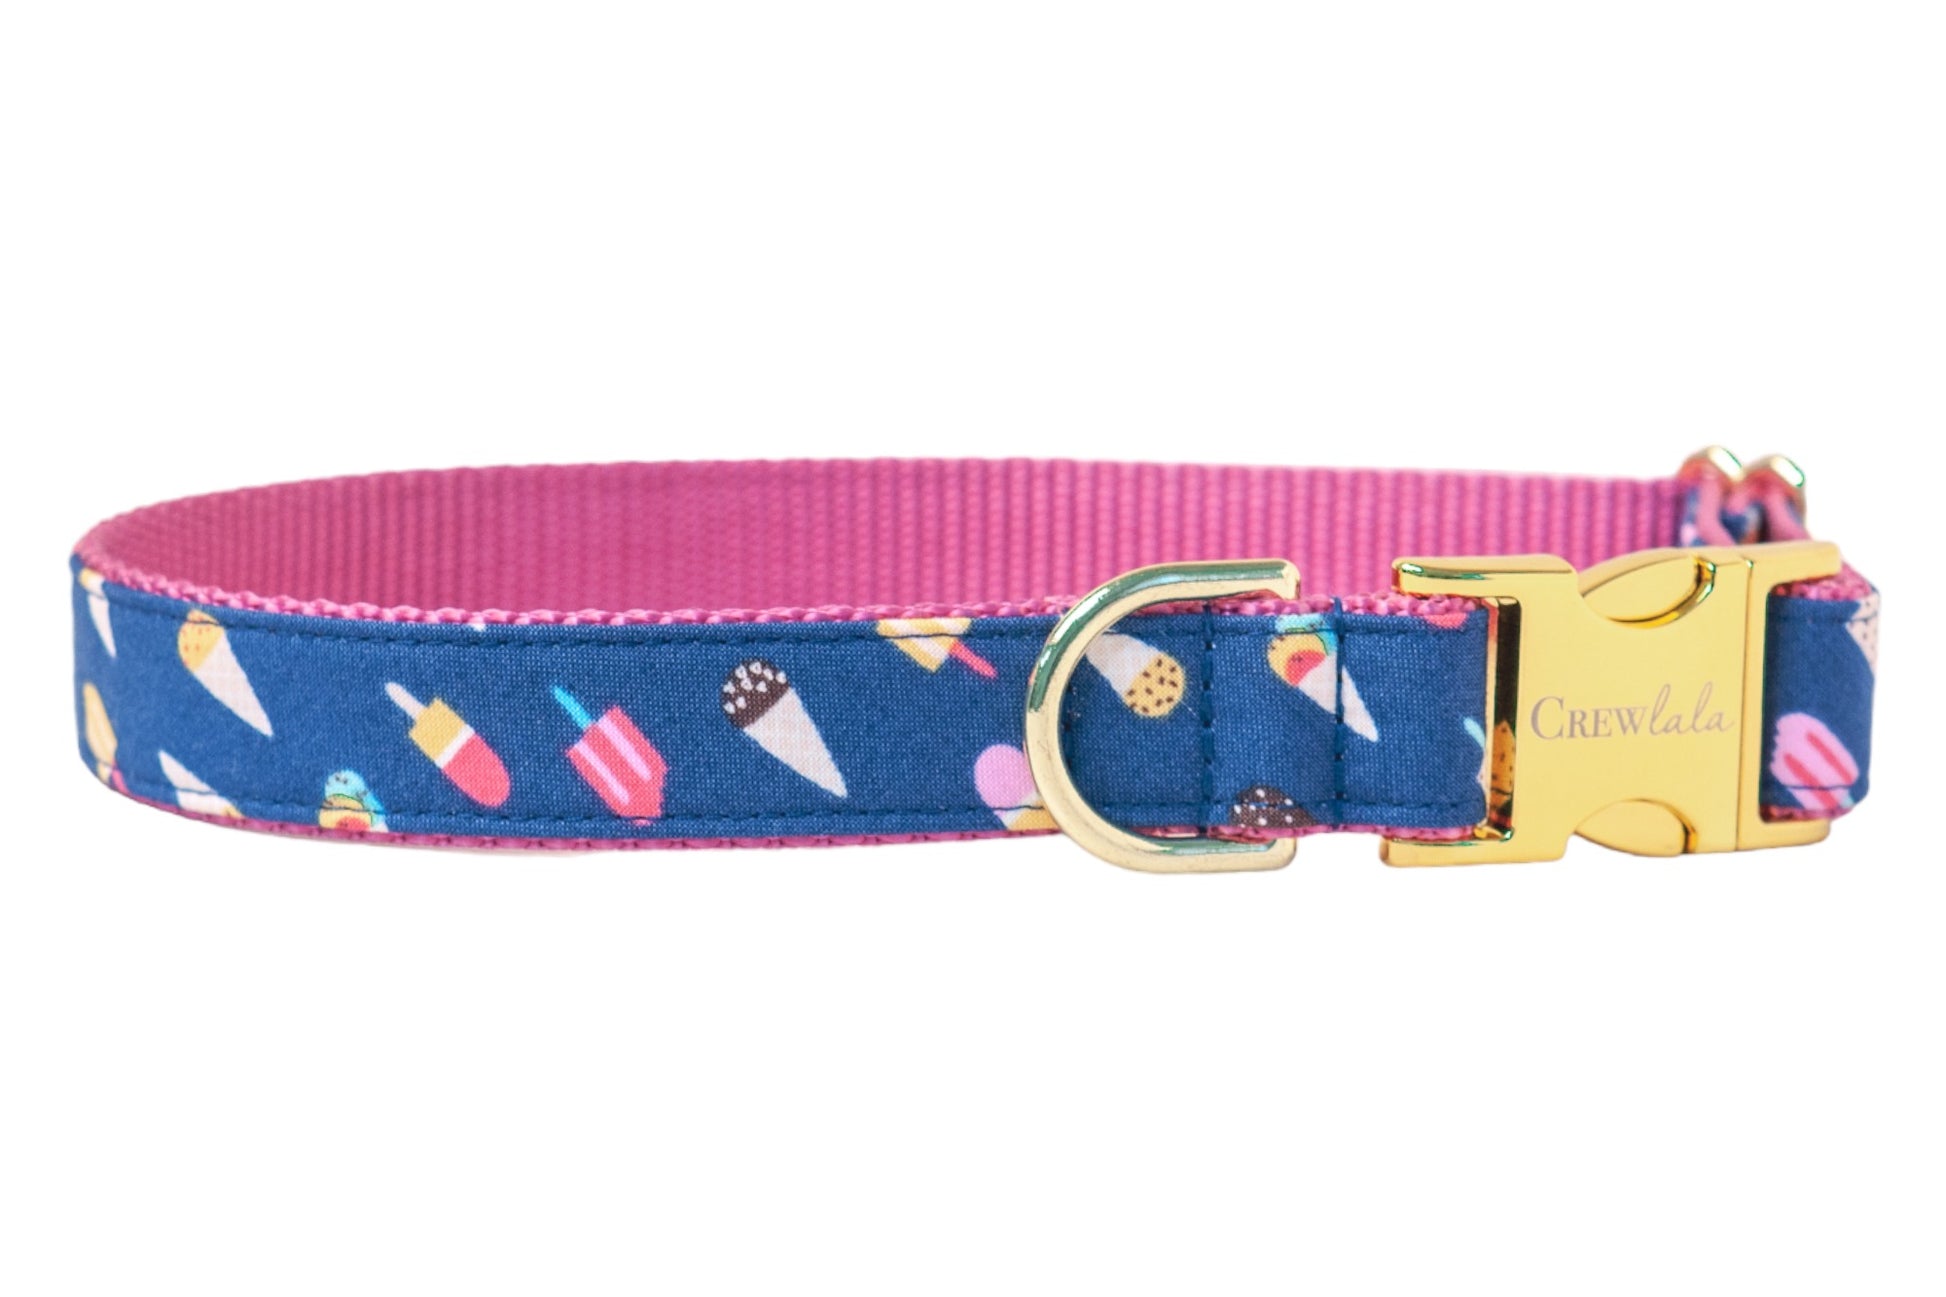 Summer Scoops Dog Collar - Two Styles! - Crew LaLa